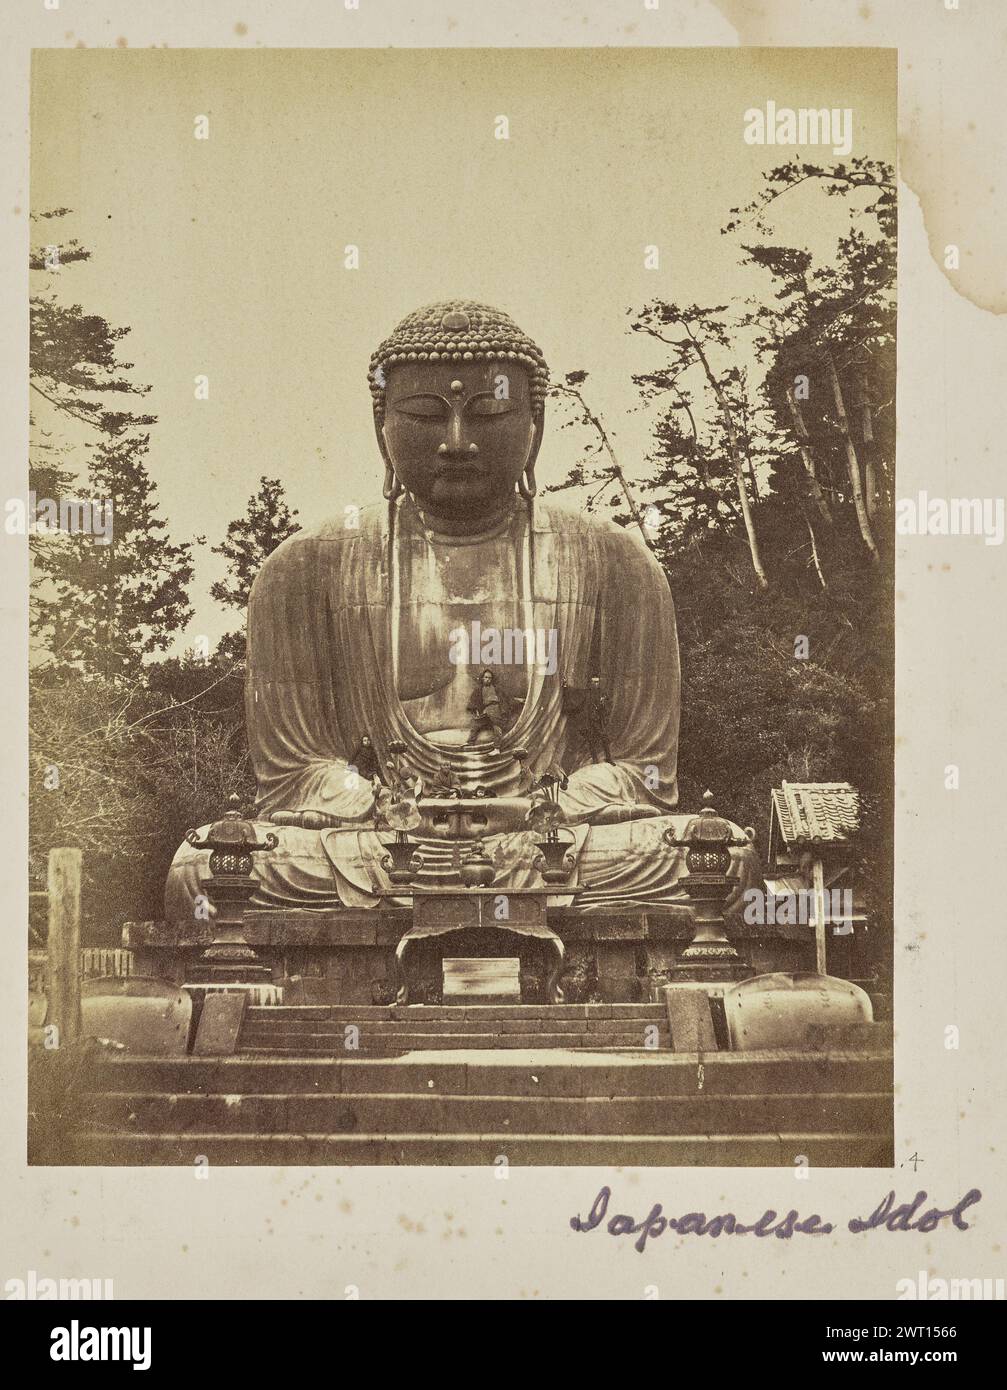 Japanese Idol. Unknown, photographer 1860s–1870s View of the 'Great Buddha' statue at the Kotoku-in Buddhist Temple, a monumental bronze statue depicting a seated Buddha. Five people can be seen sitting or standing on different parts of the statue. (Recto, mount) lower right, below image, in purple ink: 'Japanese Idol'; Stock Photo